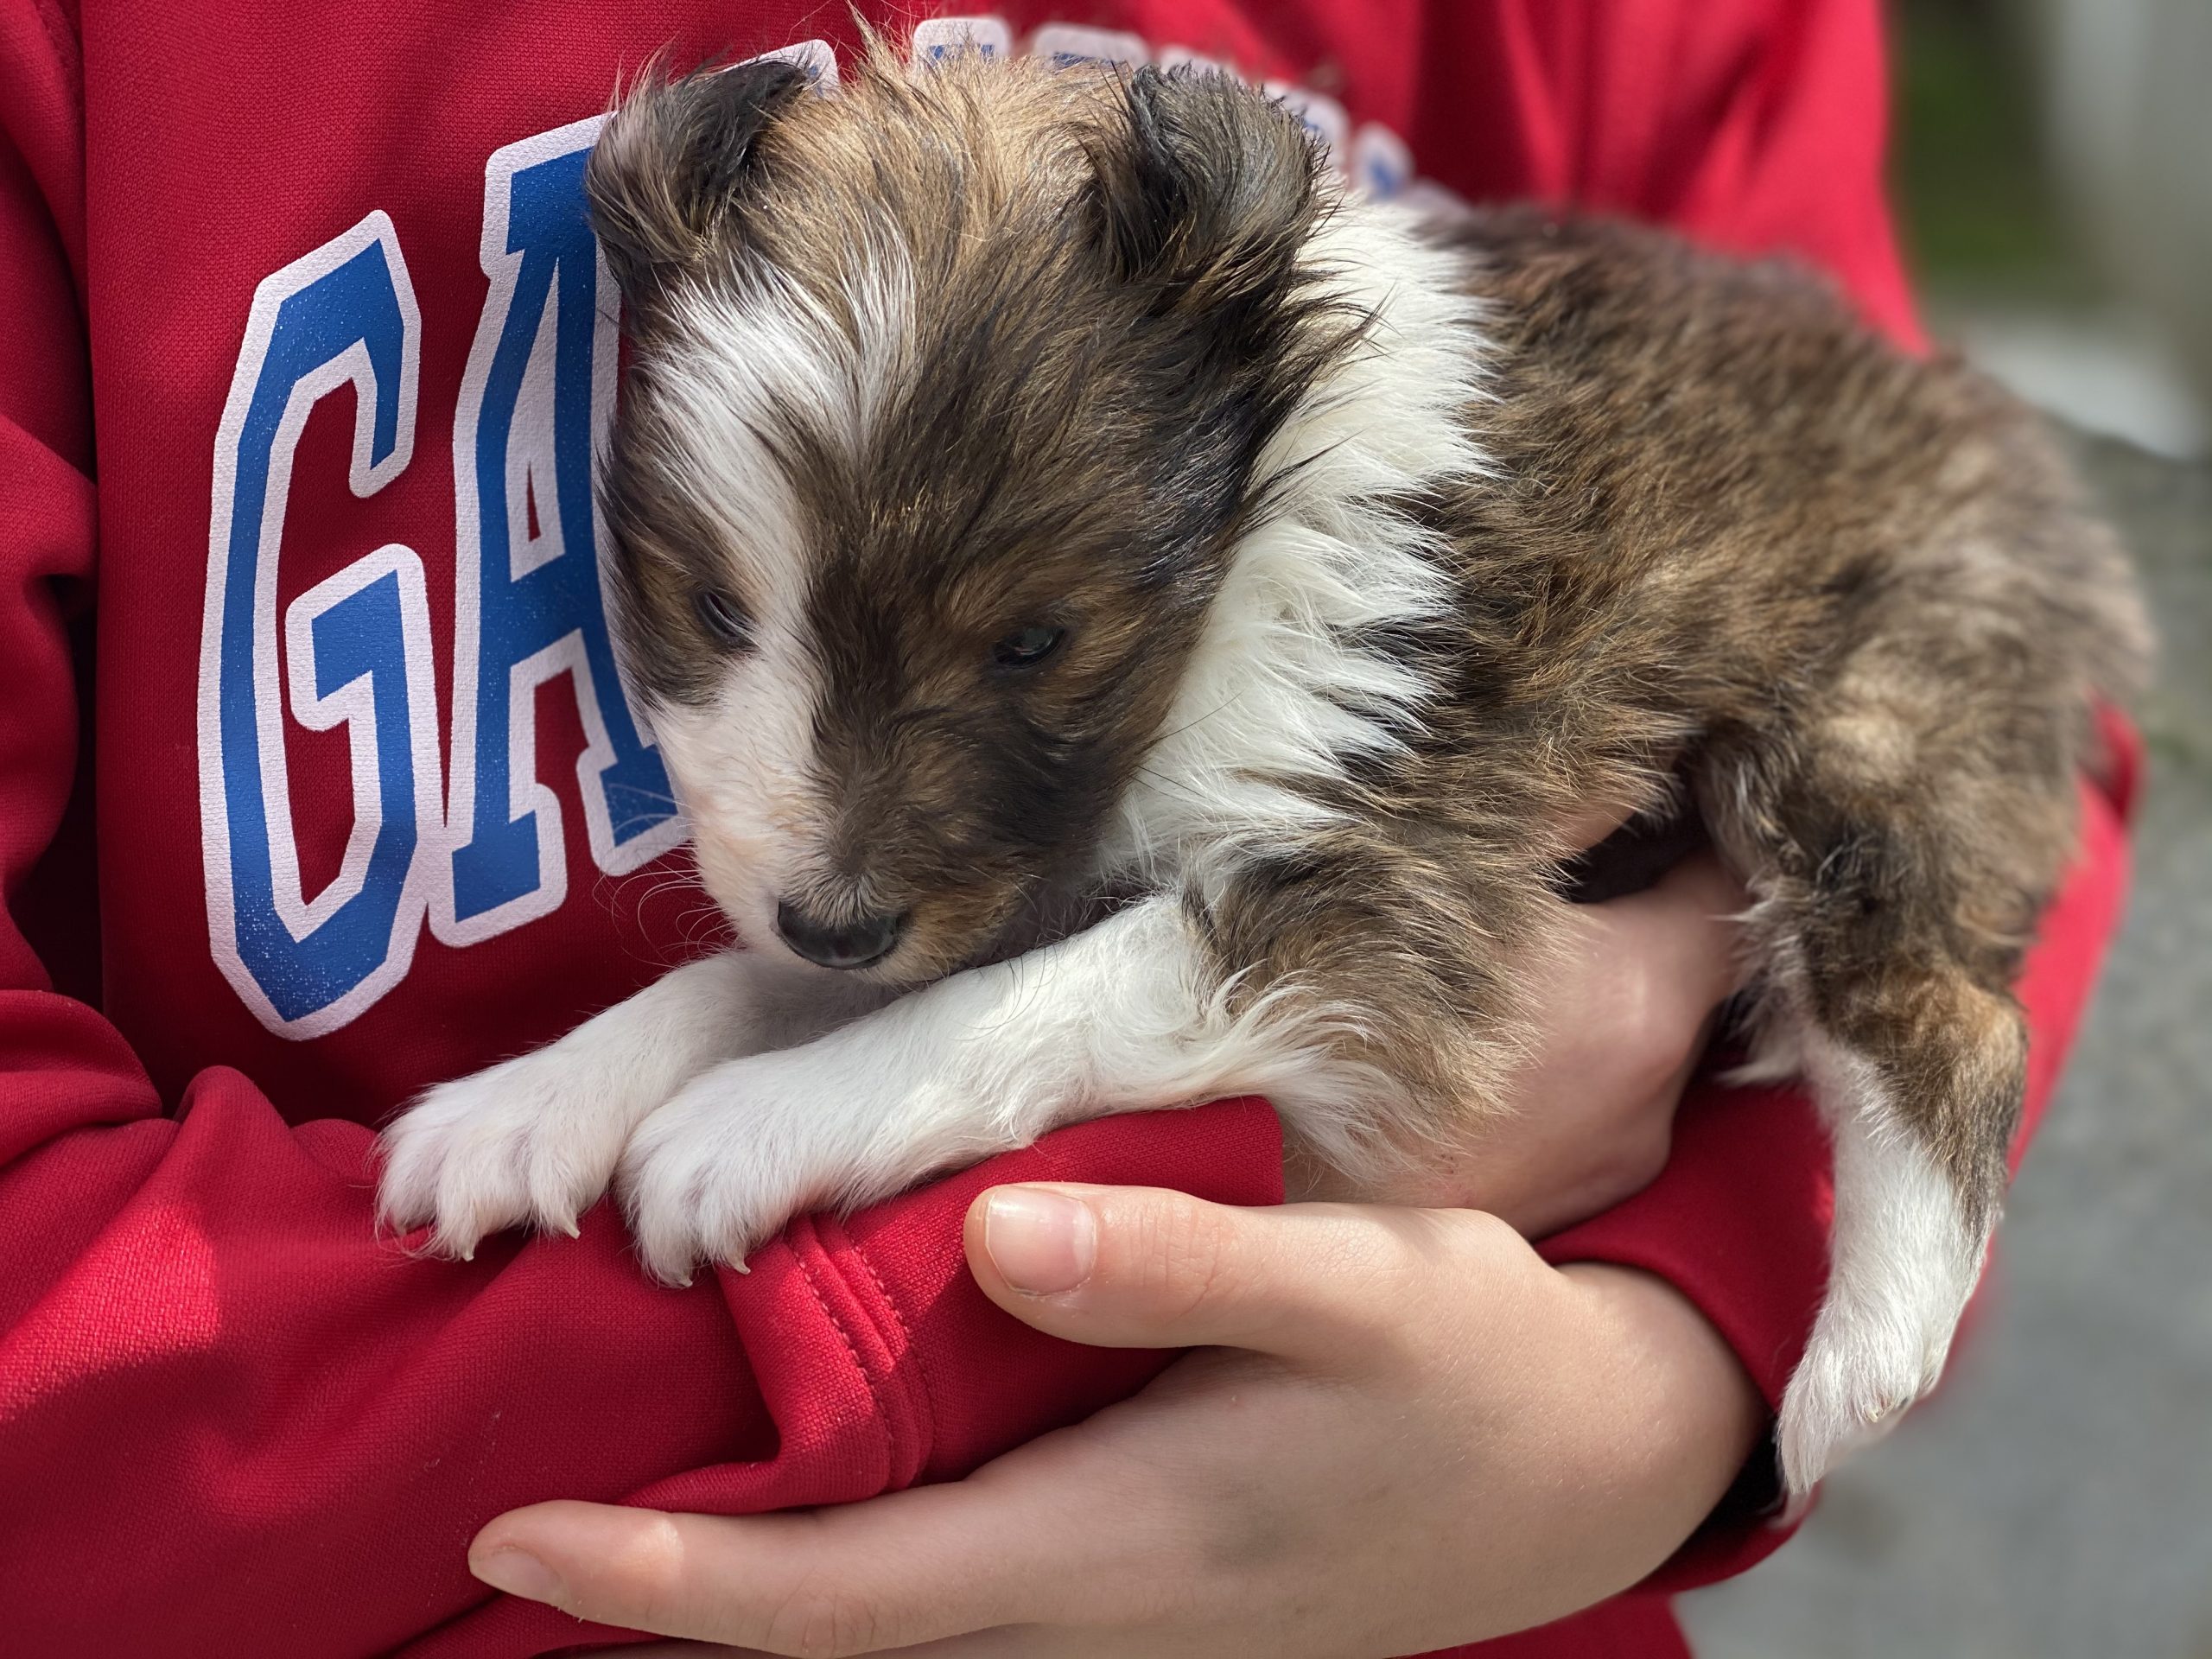 Beautiful Puppies at play. For sale mini shetland sheepdogs playful puppies of Ohio. Cute and cuddly playful mini sheltie pups for sale